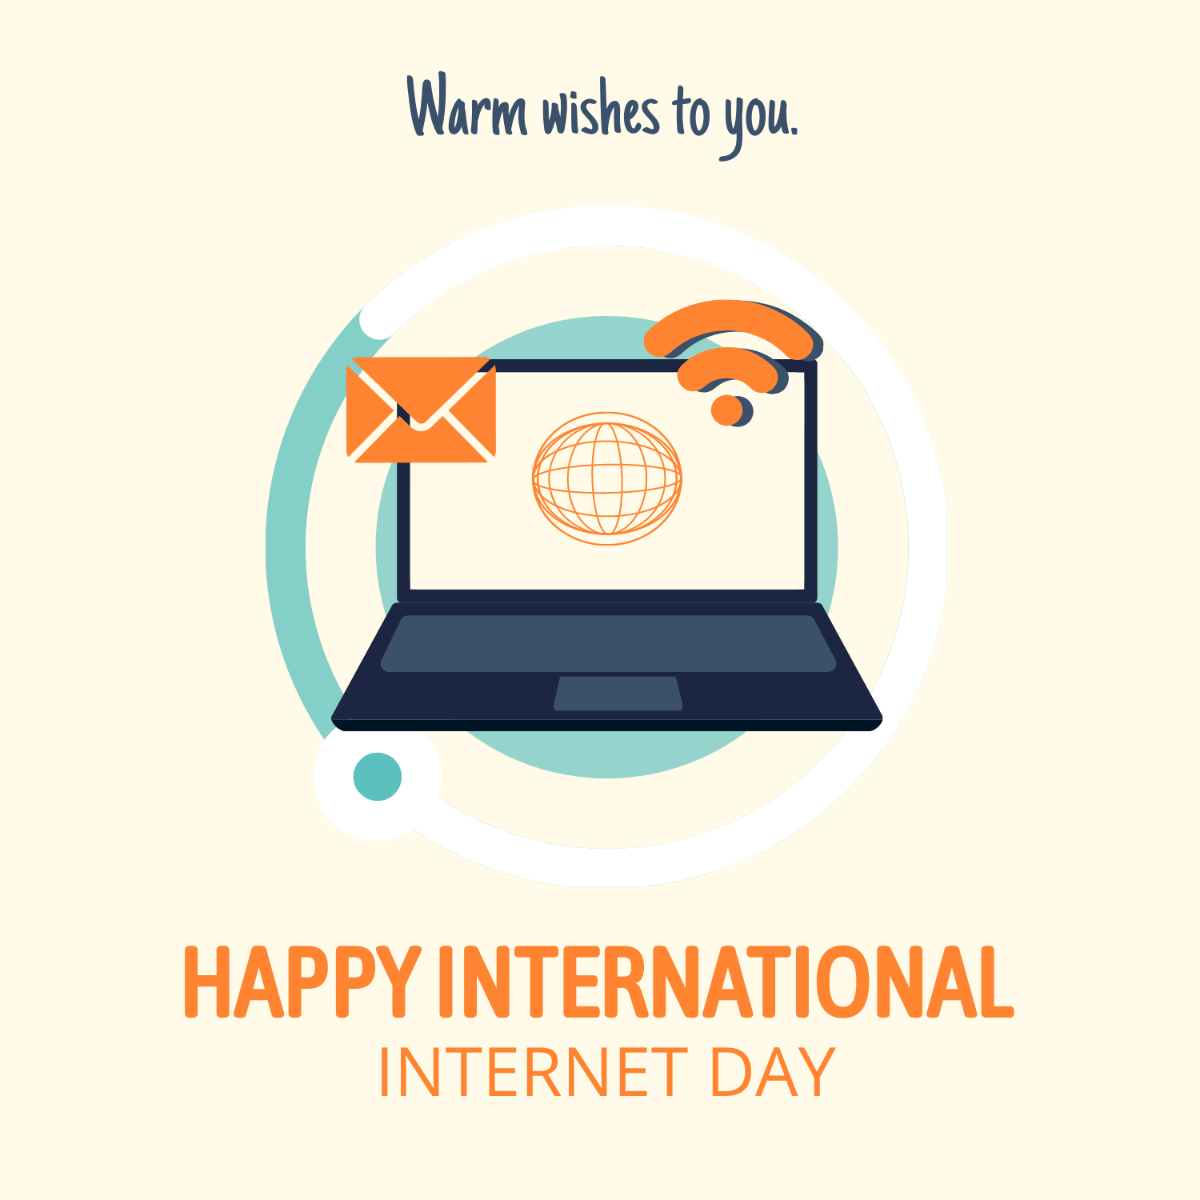 Free International Internet Day Wishes Vector Template